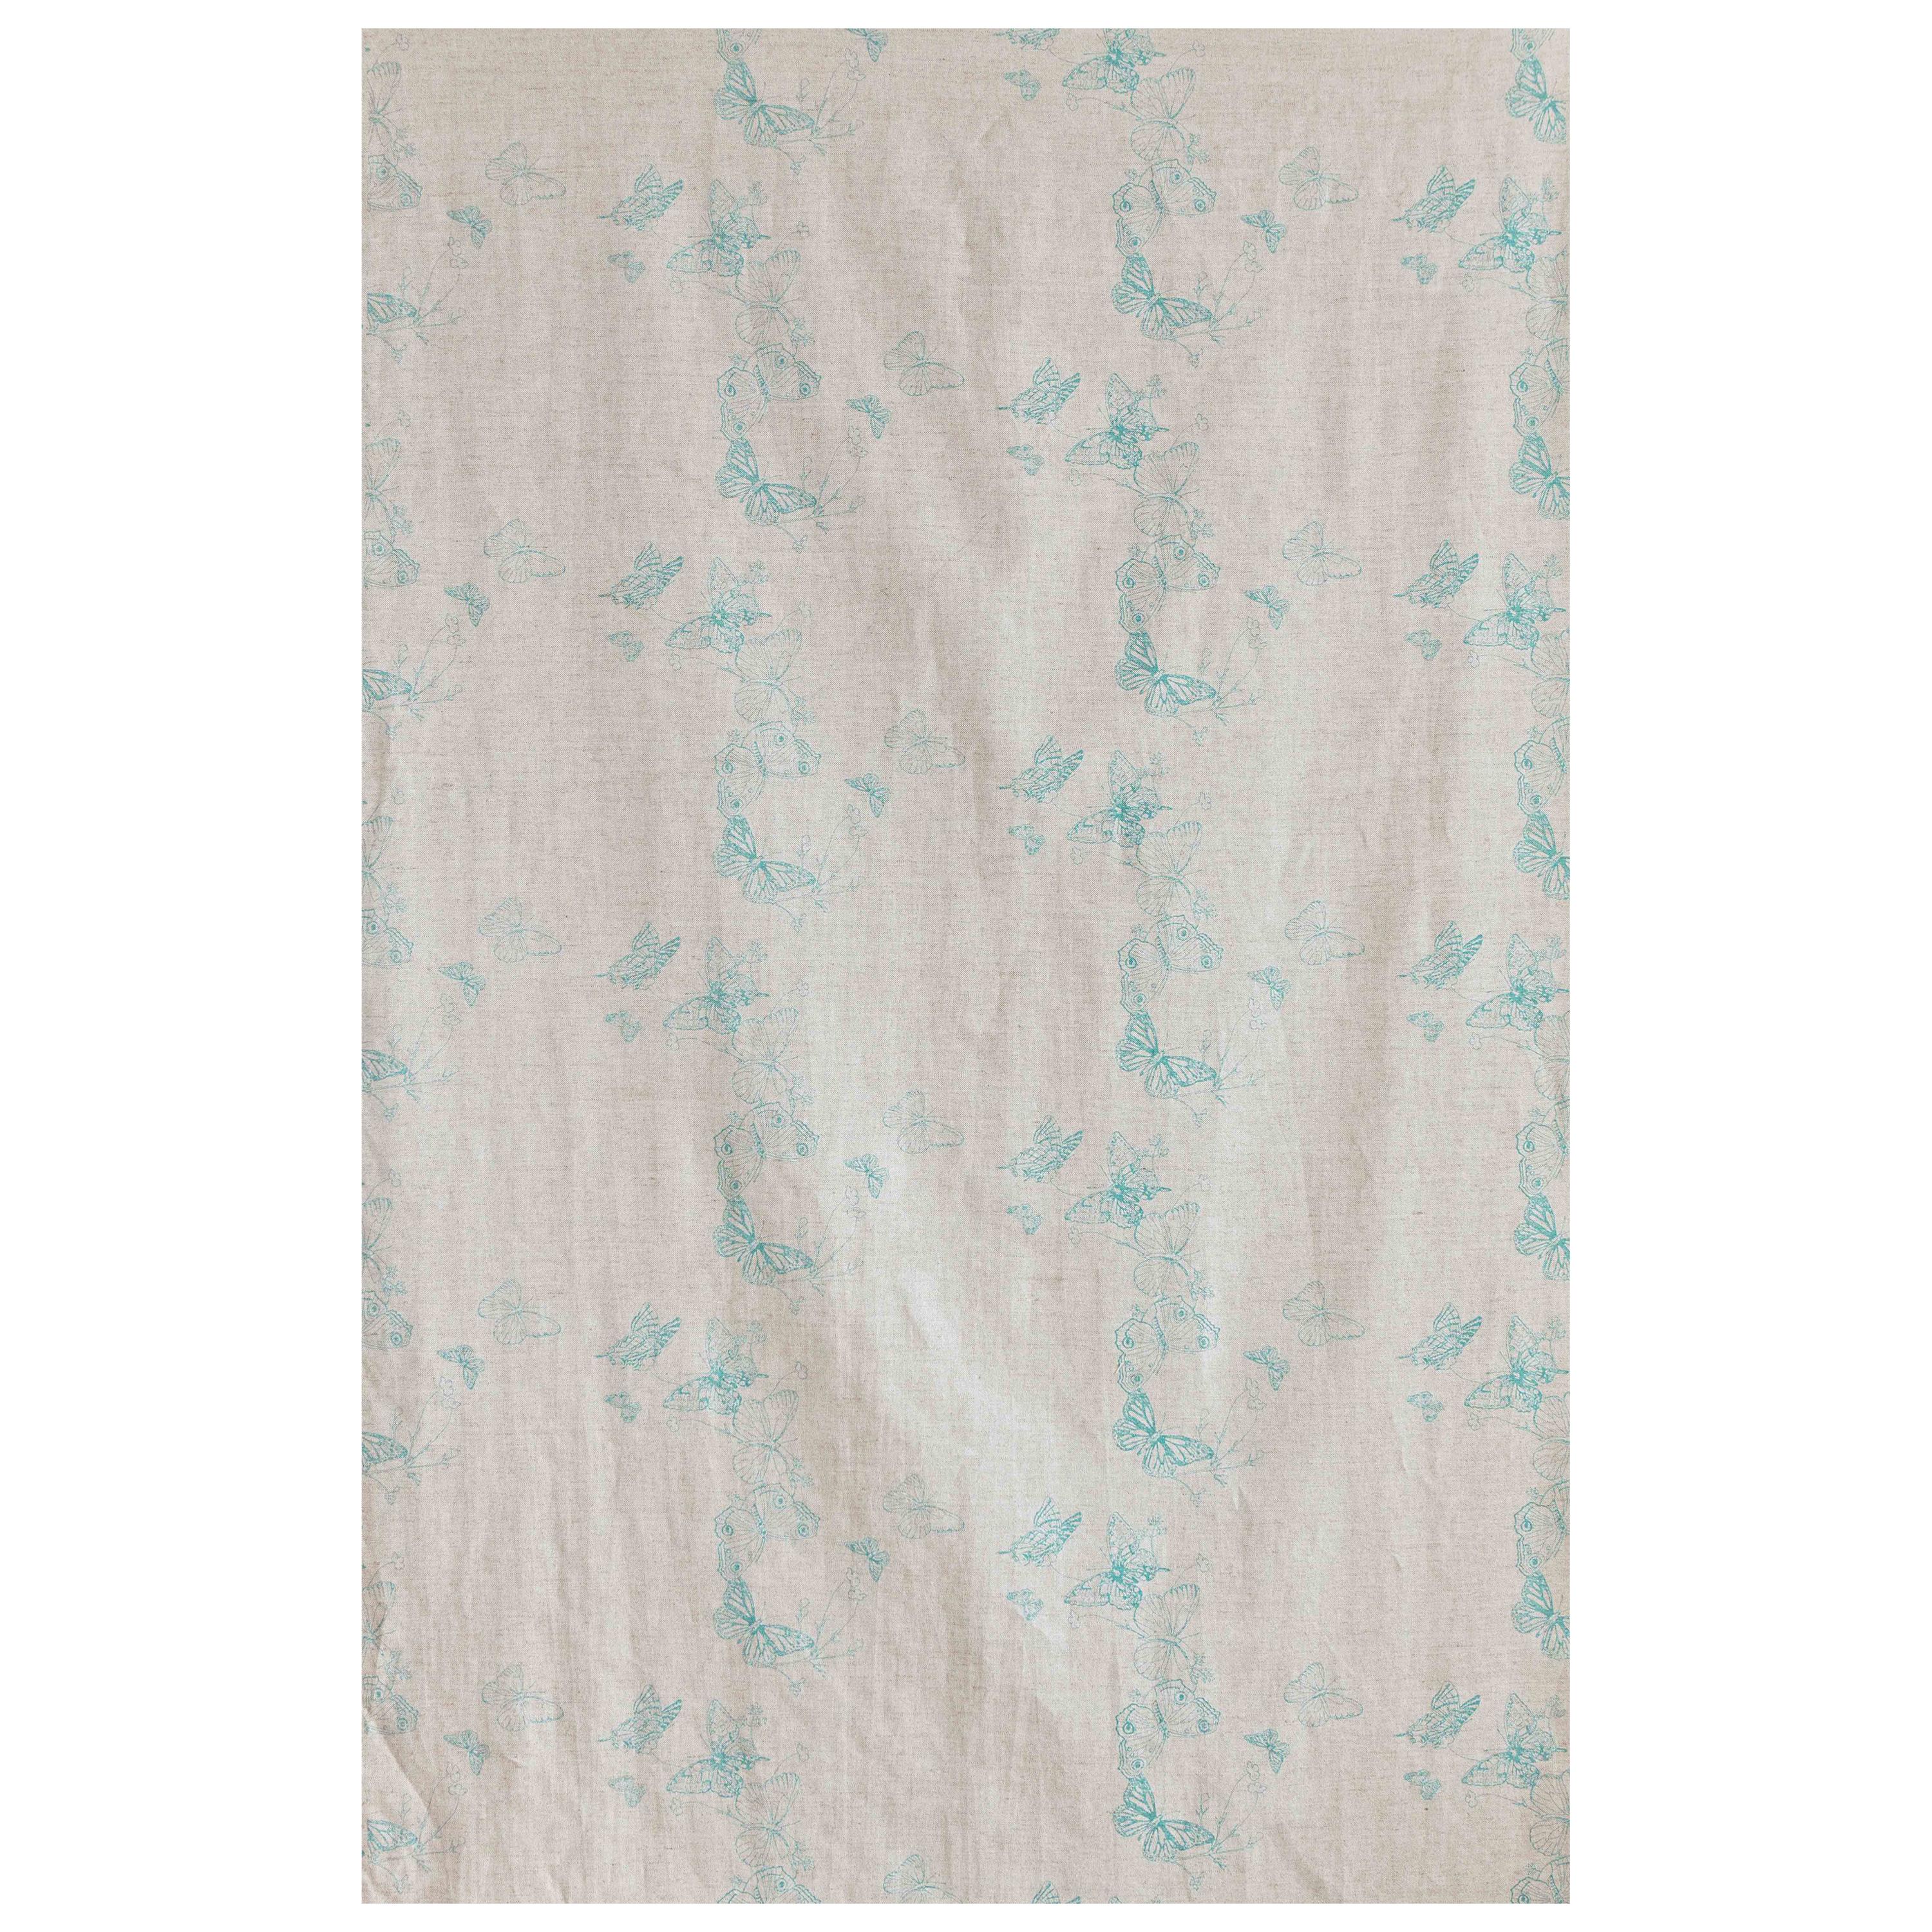 'Bugs & Butterflies' Contemporary, Traditional Fabric in Ice Blue For Sale